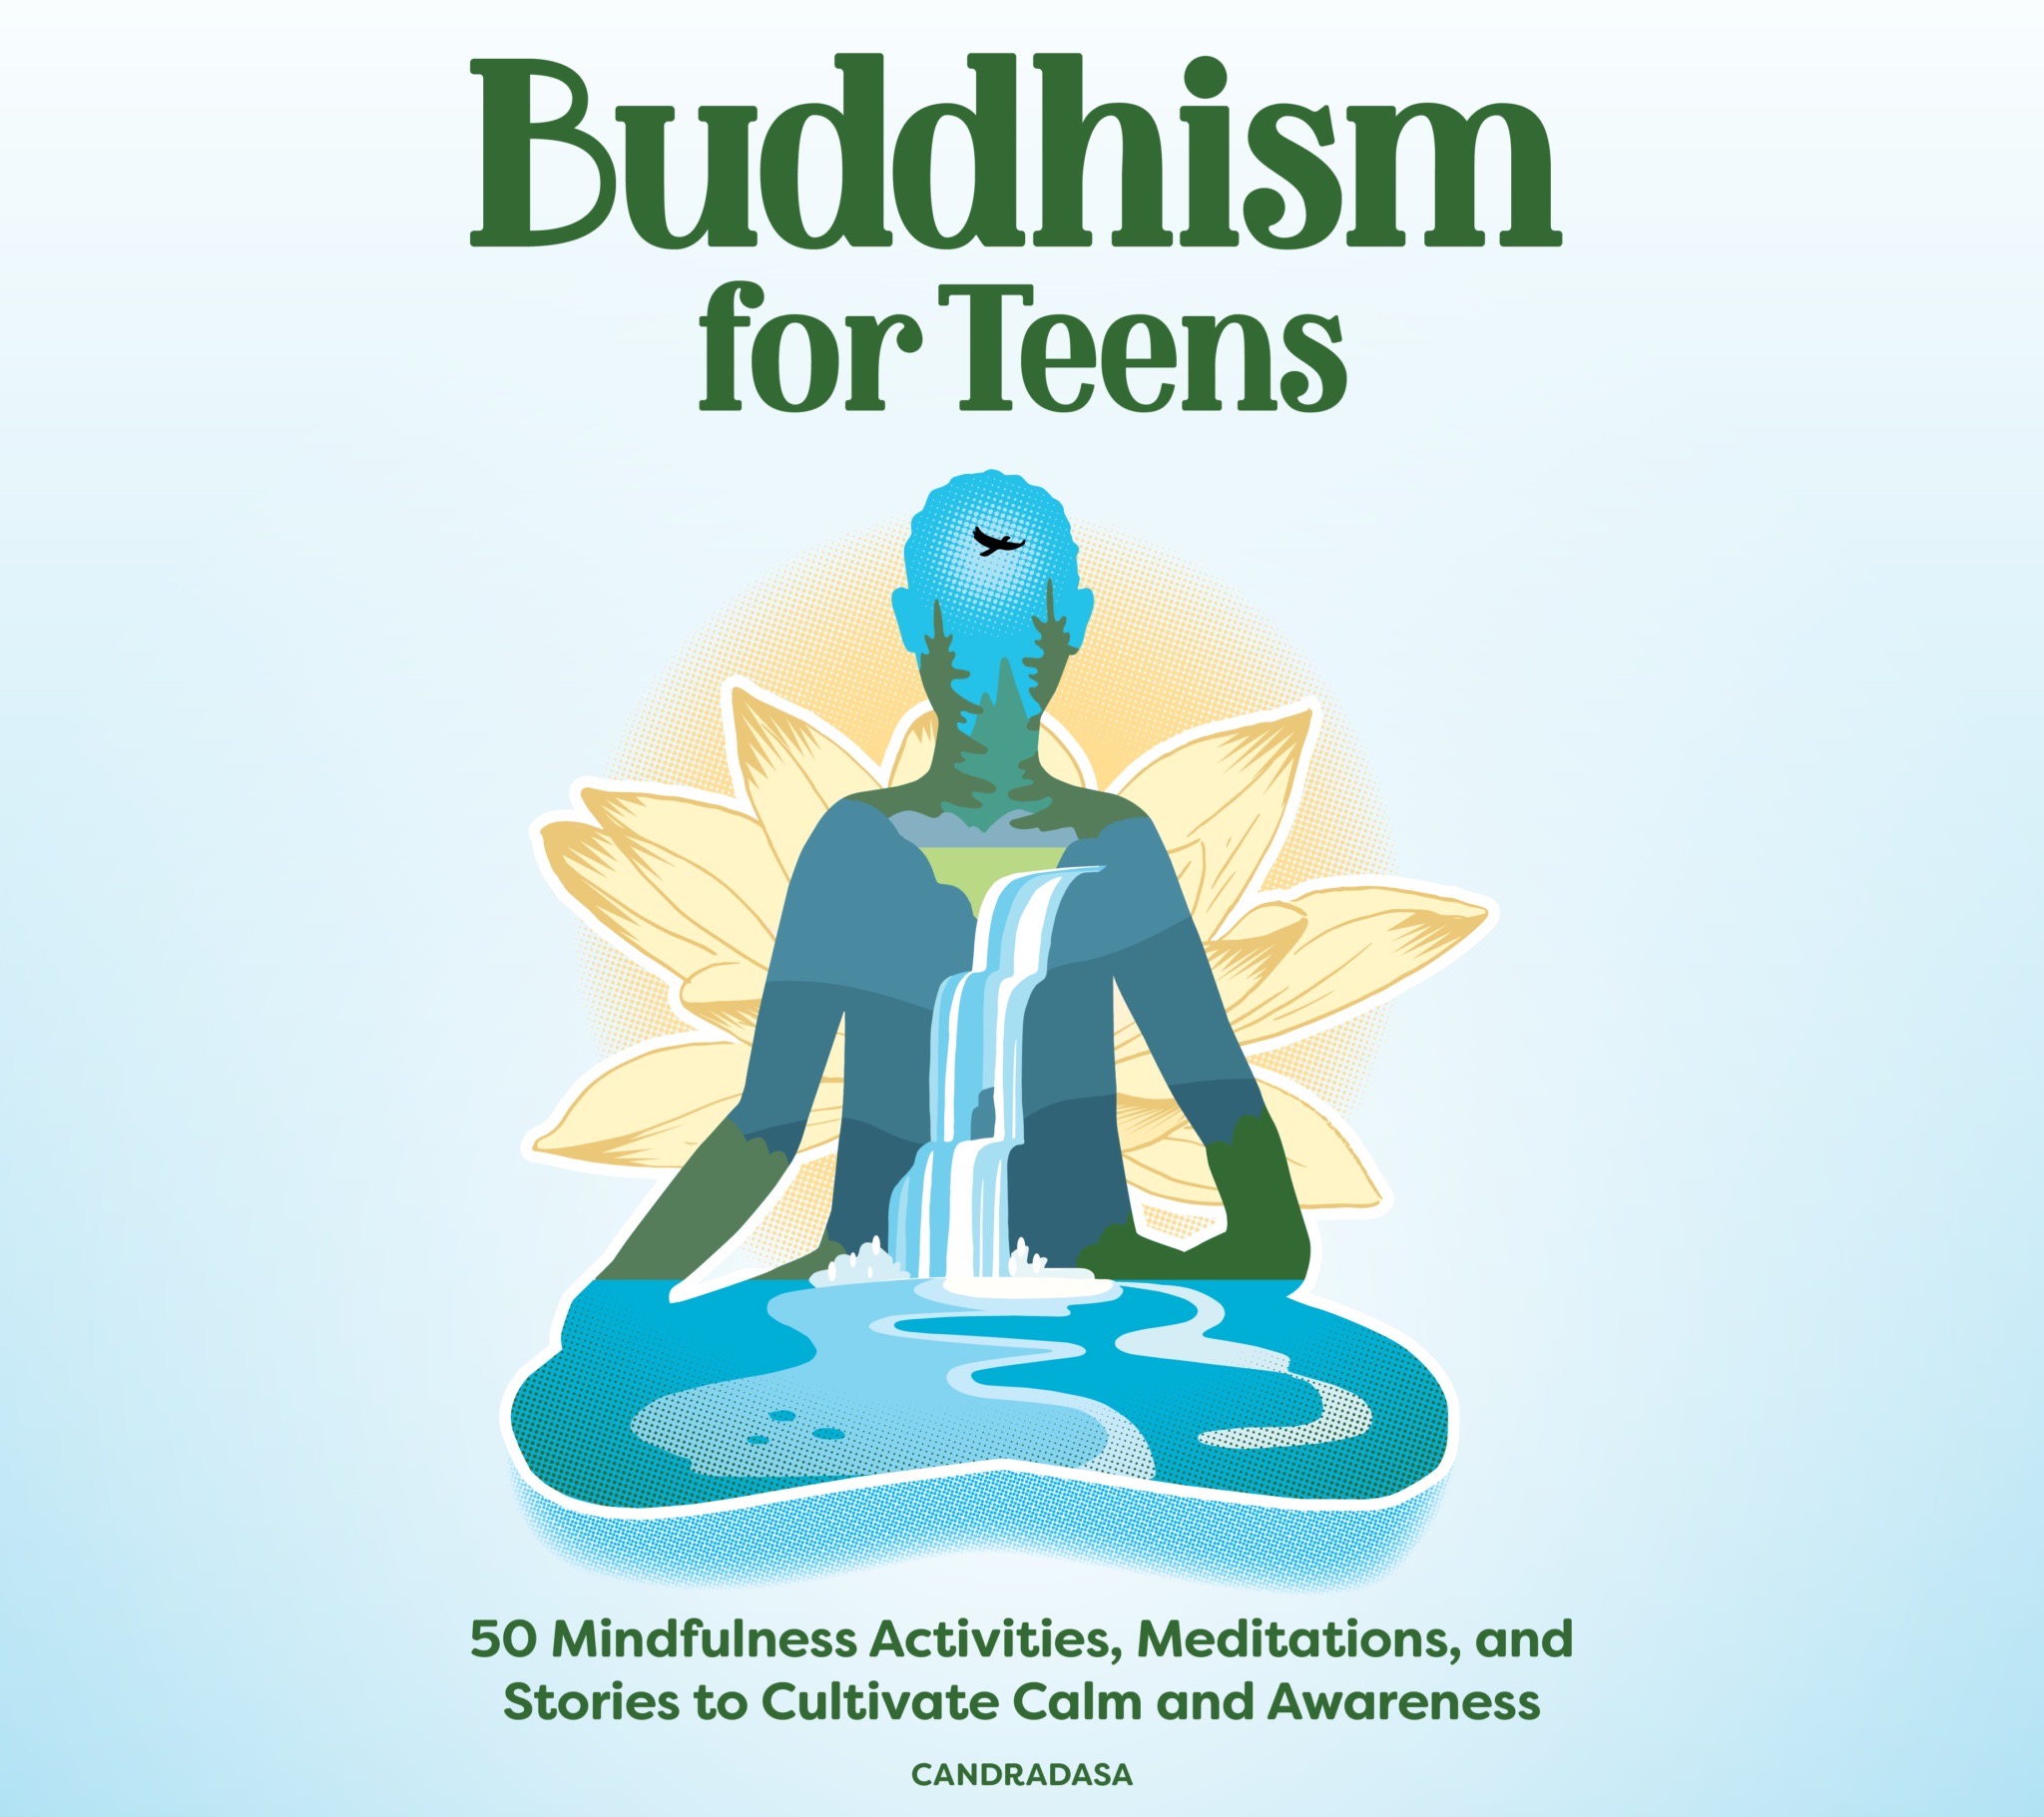 Ṣe igbasilẹ Buddhism For Teens (The Buddhist Centre Podcast, Episode 424)